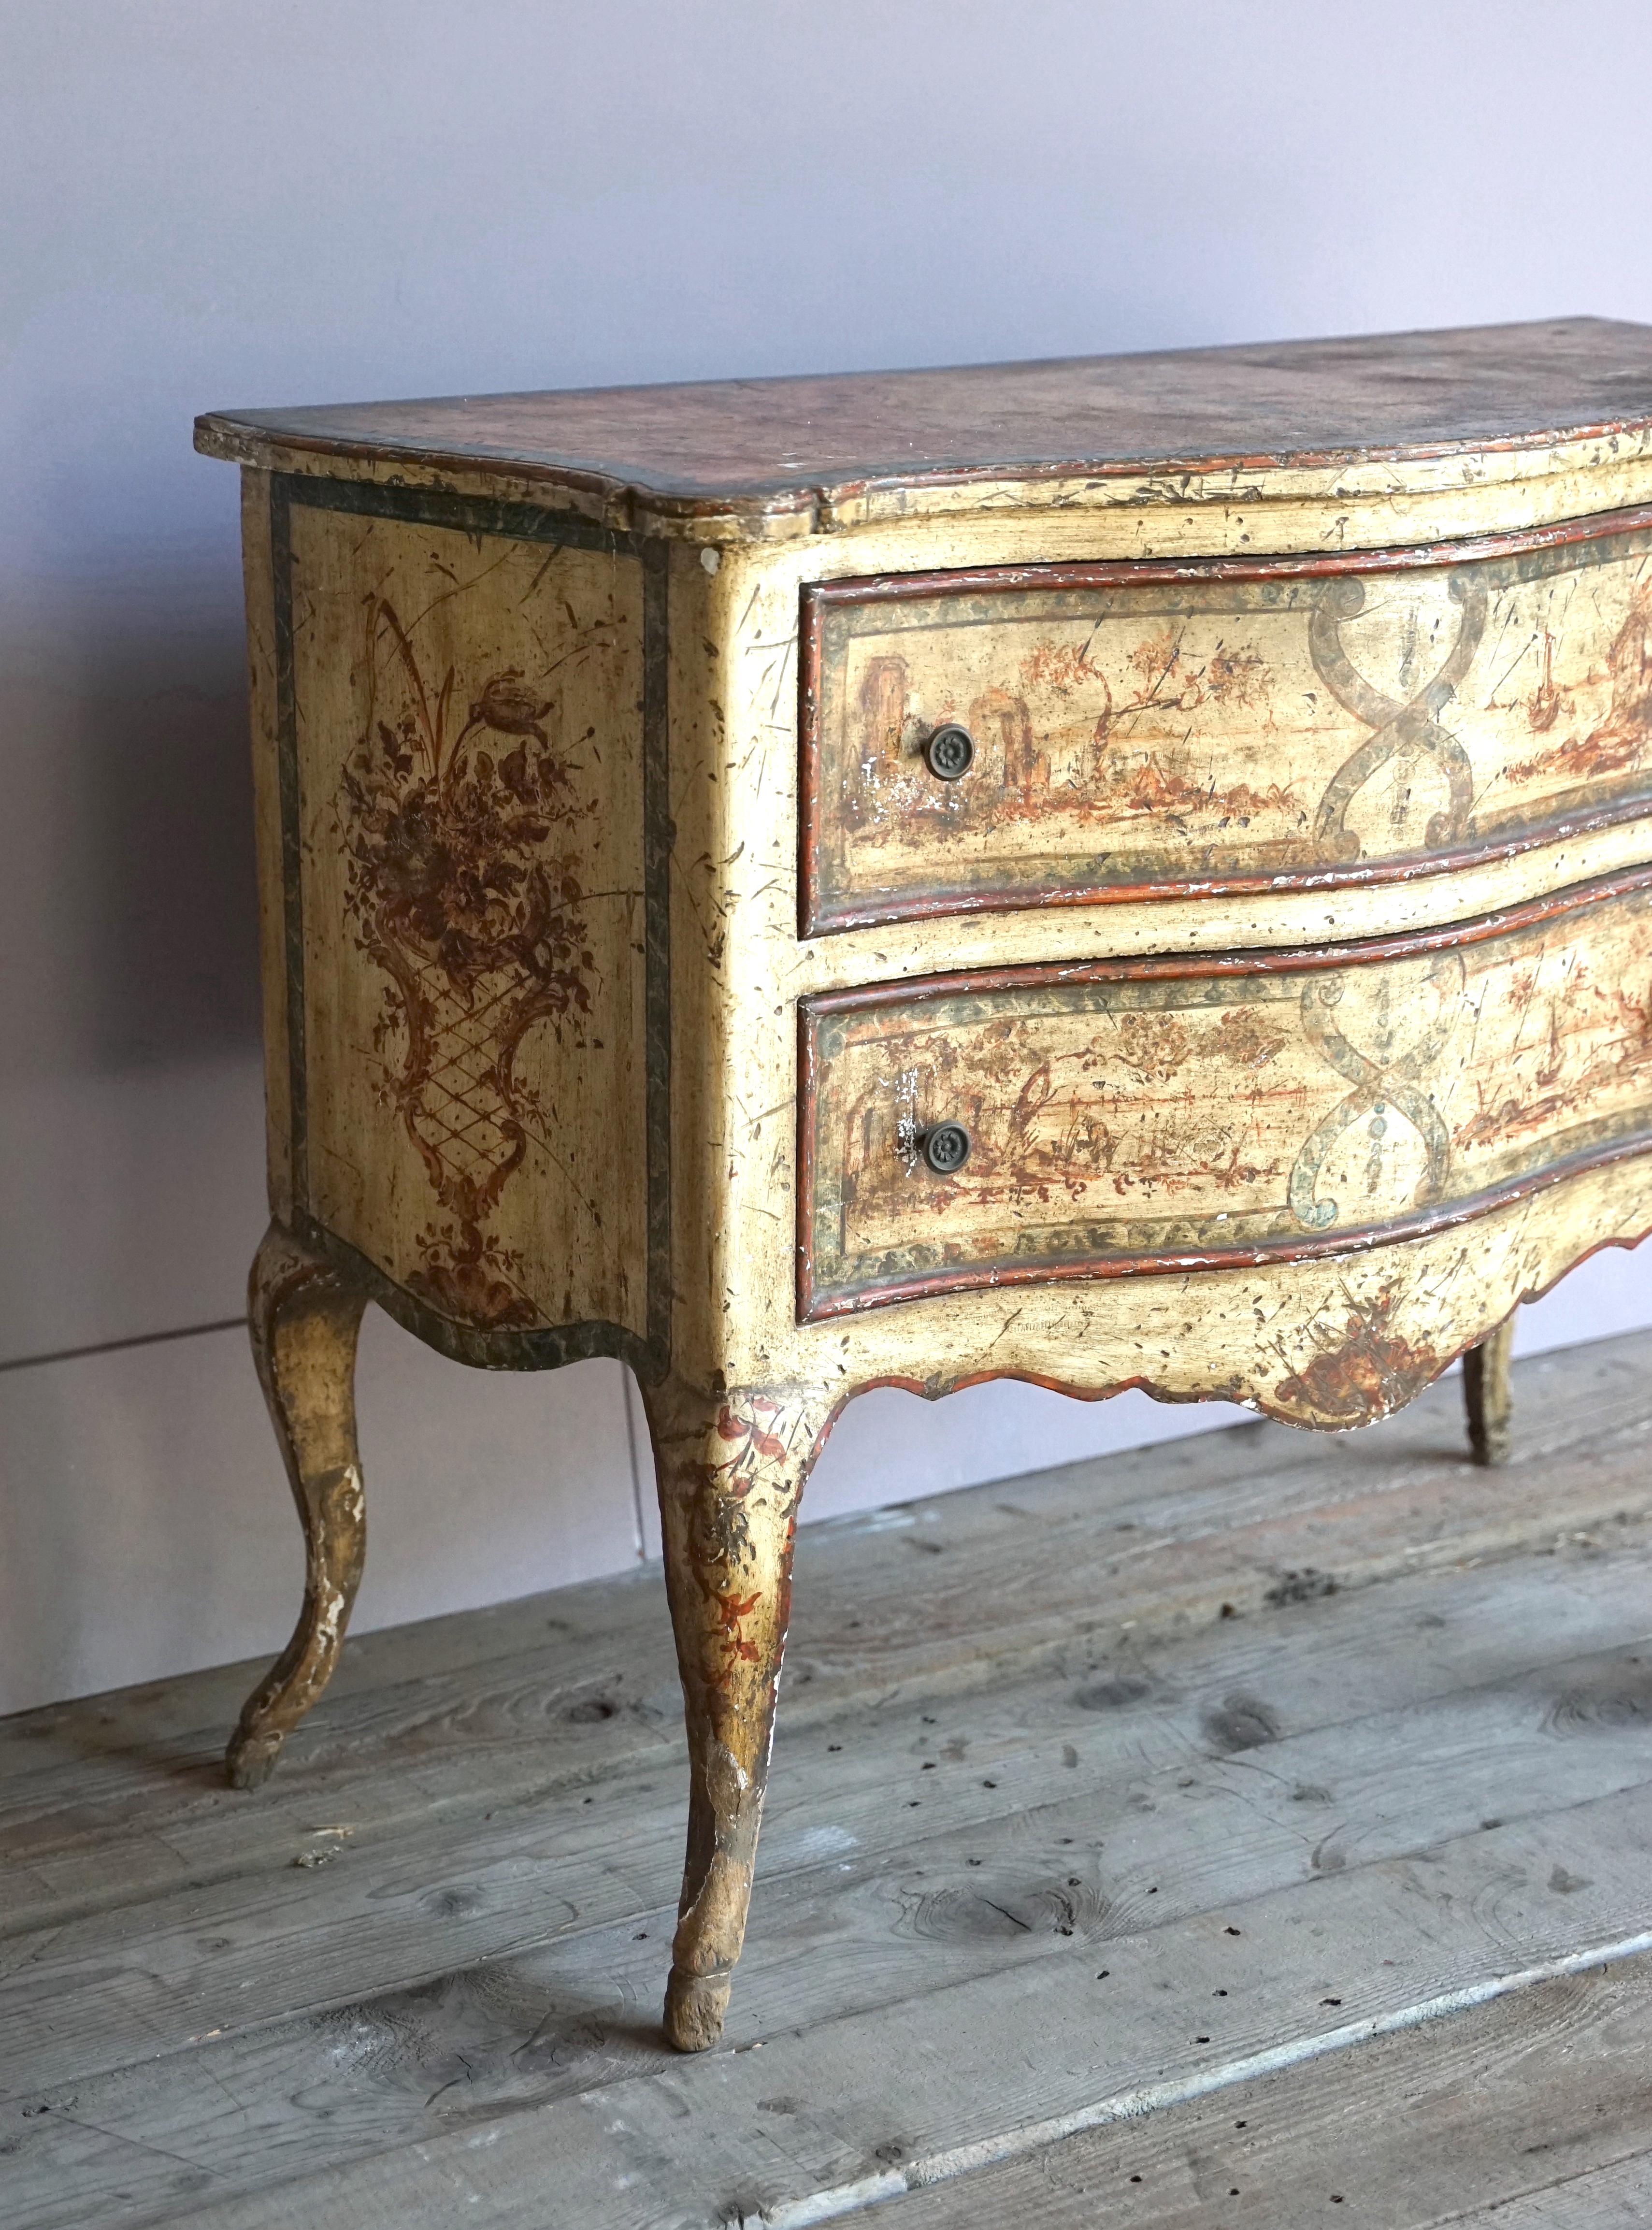 Provenance: Italy - Marche 
Age: 19th century
Dimensions: 95 x 42 x 78h cm
Condition: In good condition, signs of wear dictated by time
Description: This is a two-drawer chest of drawers of fine workmanship, originating in the Marche region and